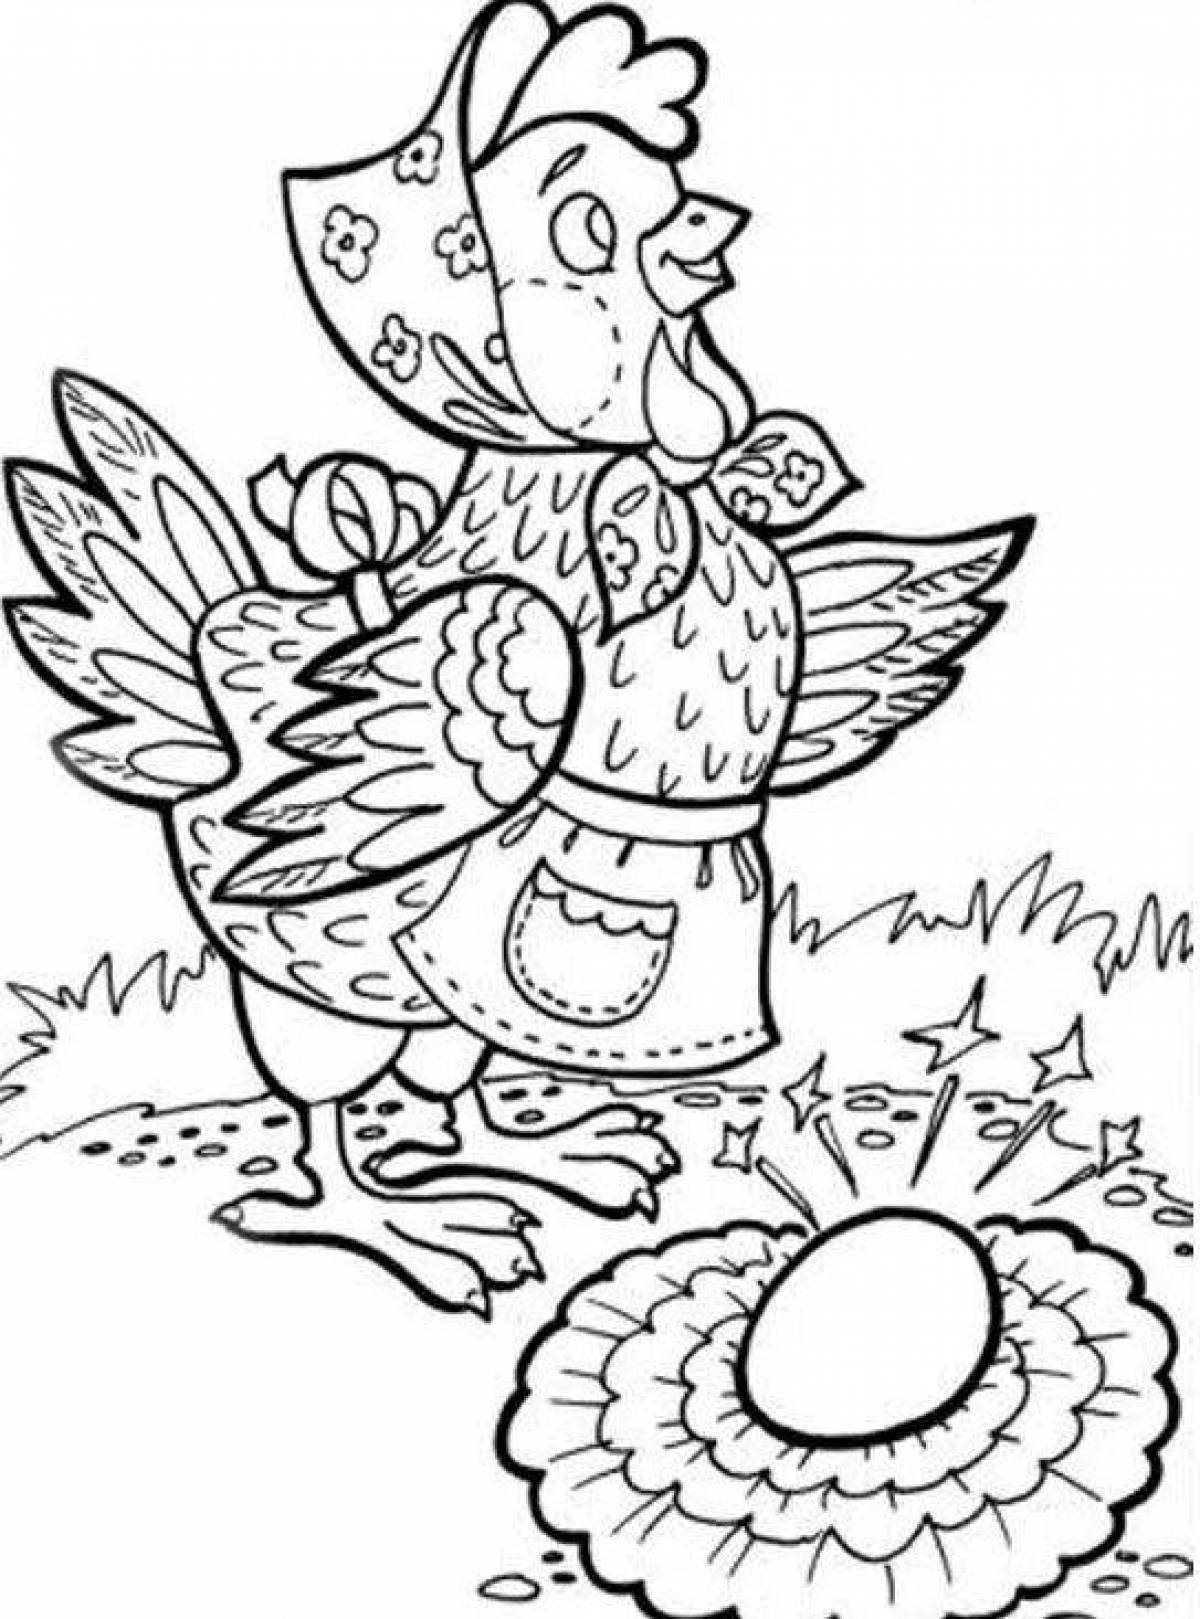 A fascinating coloring book for fairy tale characters